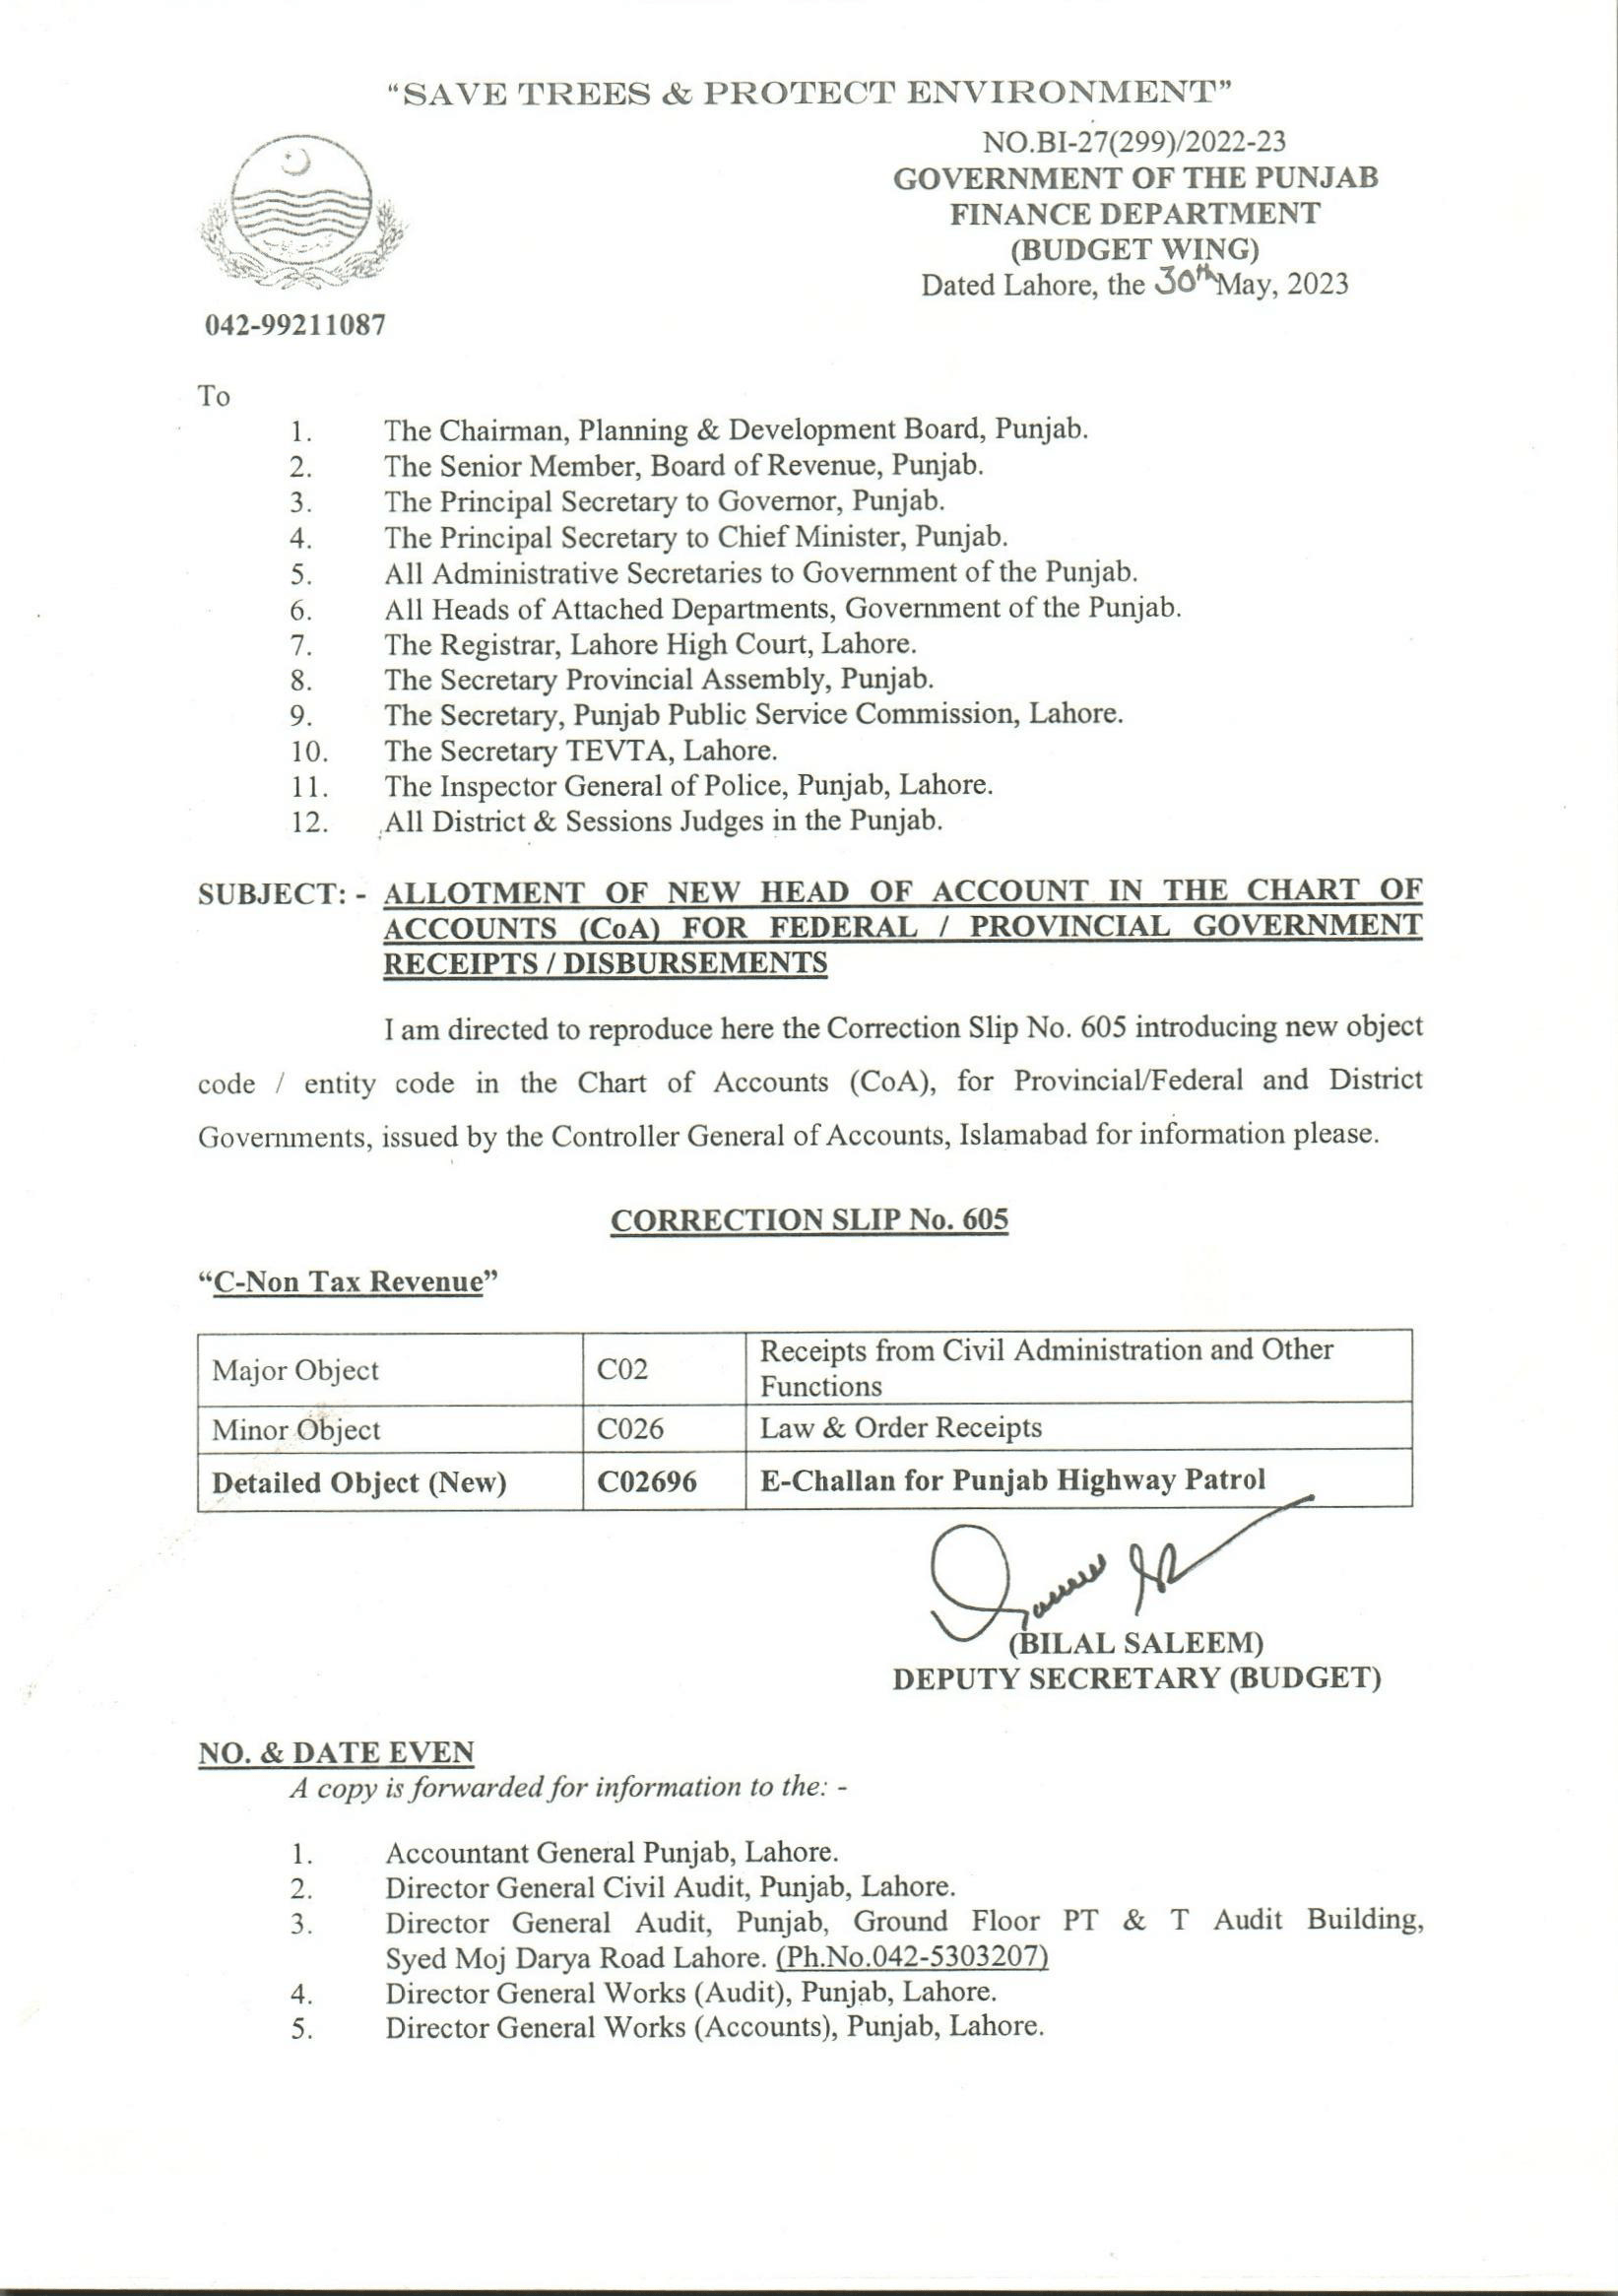 Allotment of New Head of Account in the Chart of Accounts